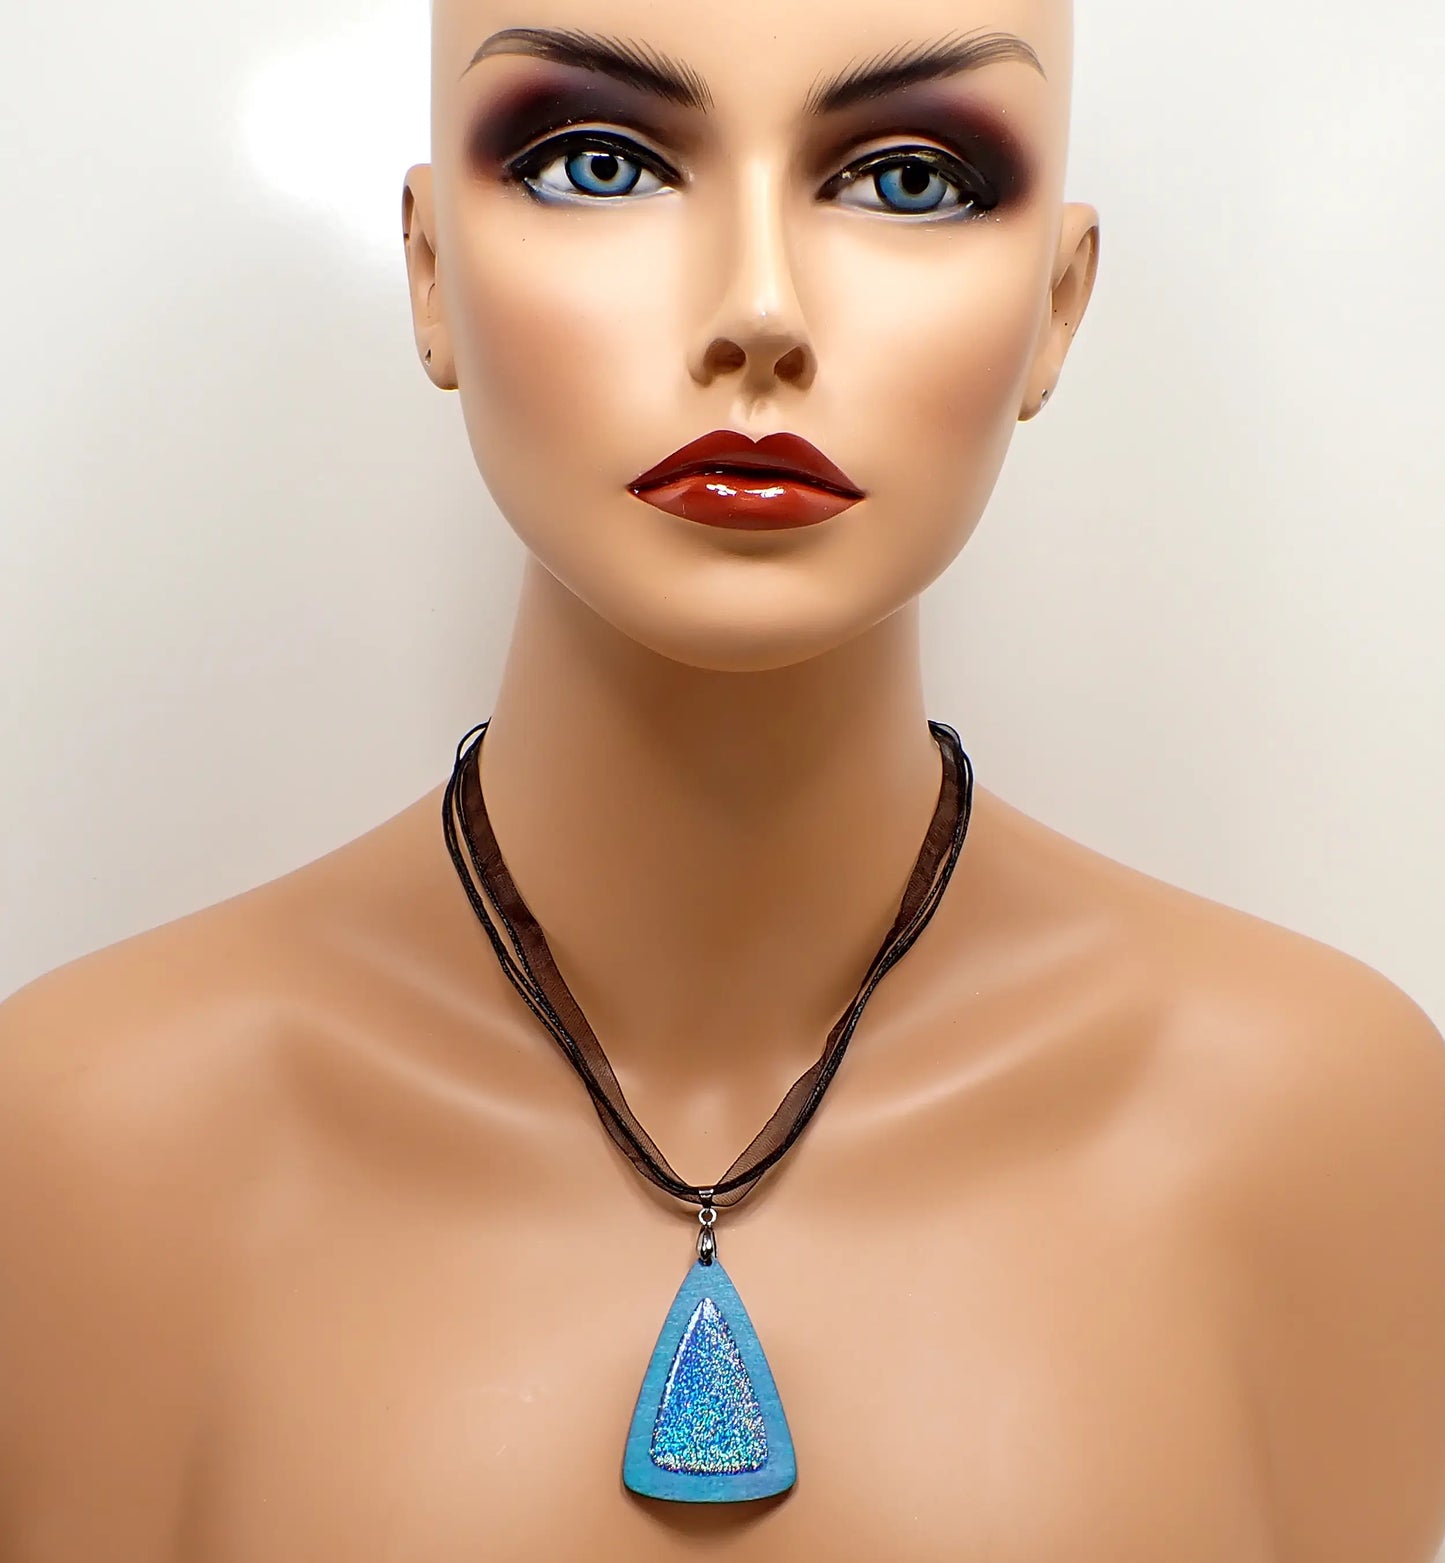 Handmade Blue Dyed Triangle Wood Pendant with Iridescent Holographic Glitter Resin, Holo Geometric Jewelry